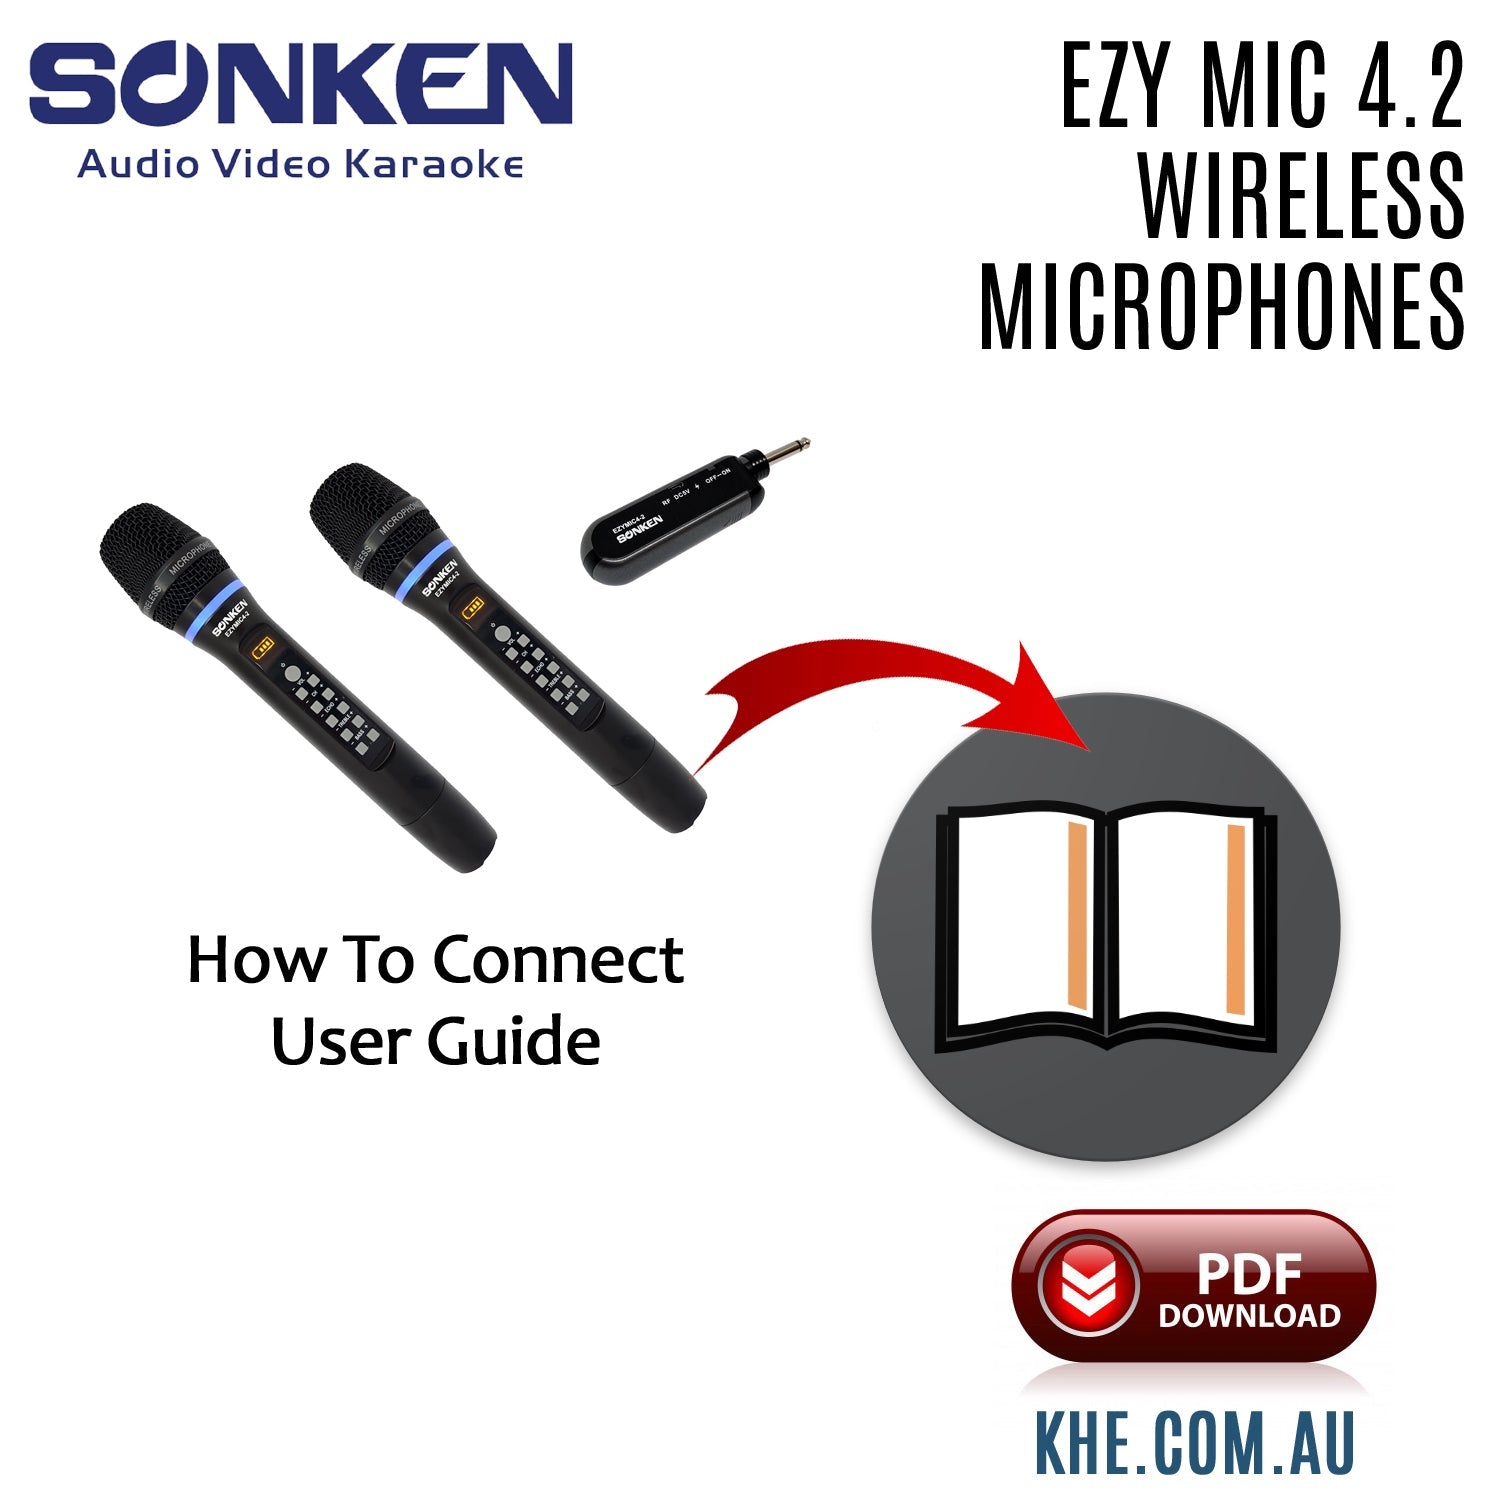 How To Connect Guide - Sonken EZY MIC 4.2 Wireless Microphones - Karaoke Home Entertainment